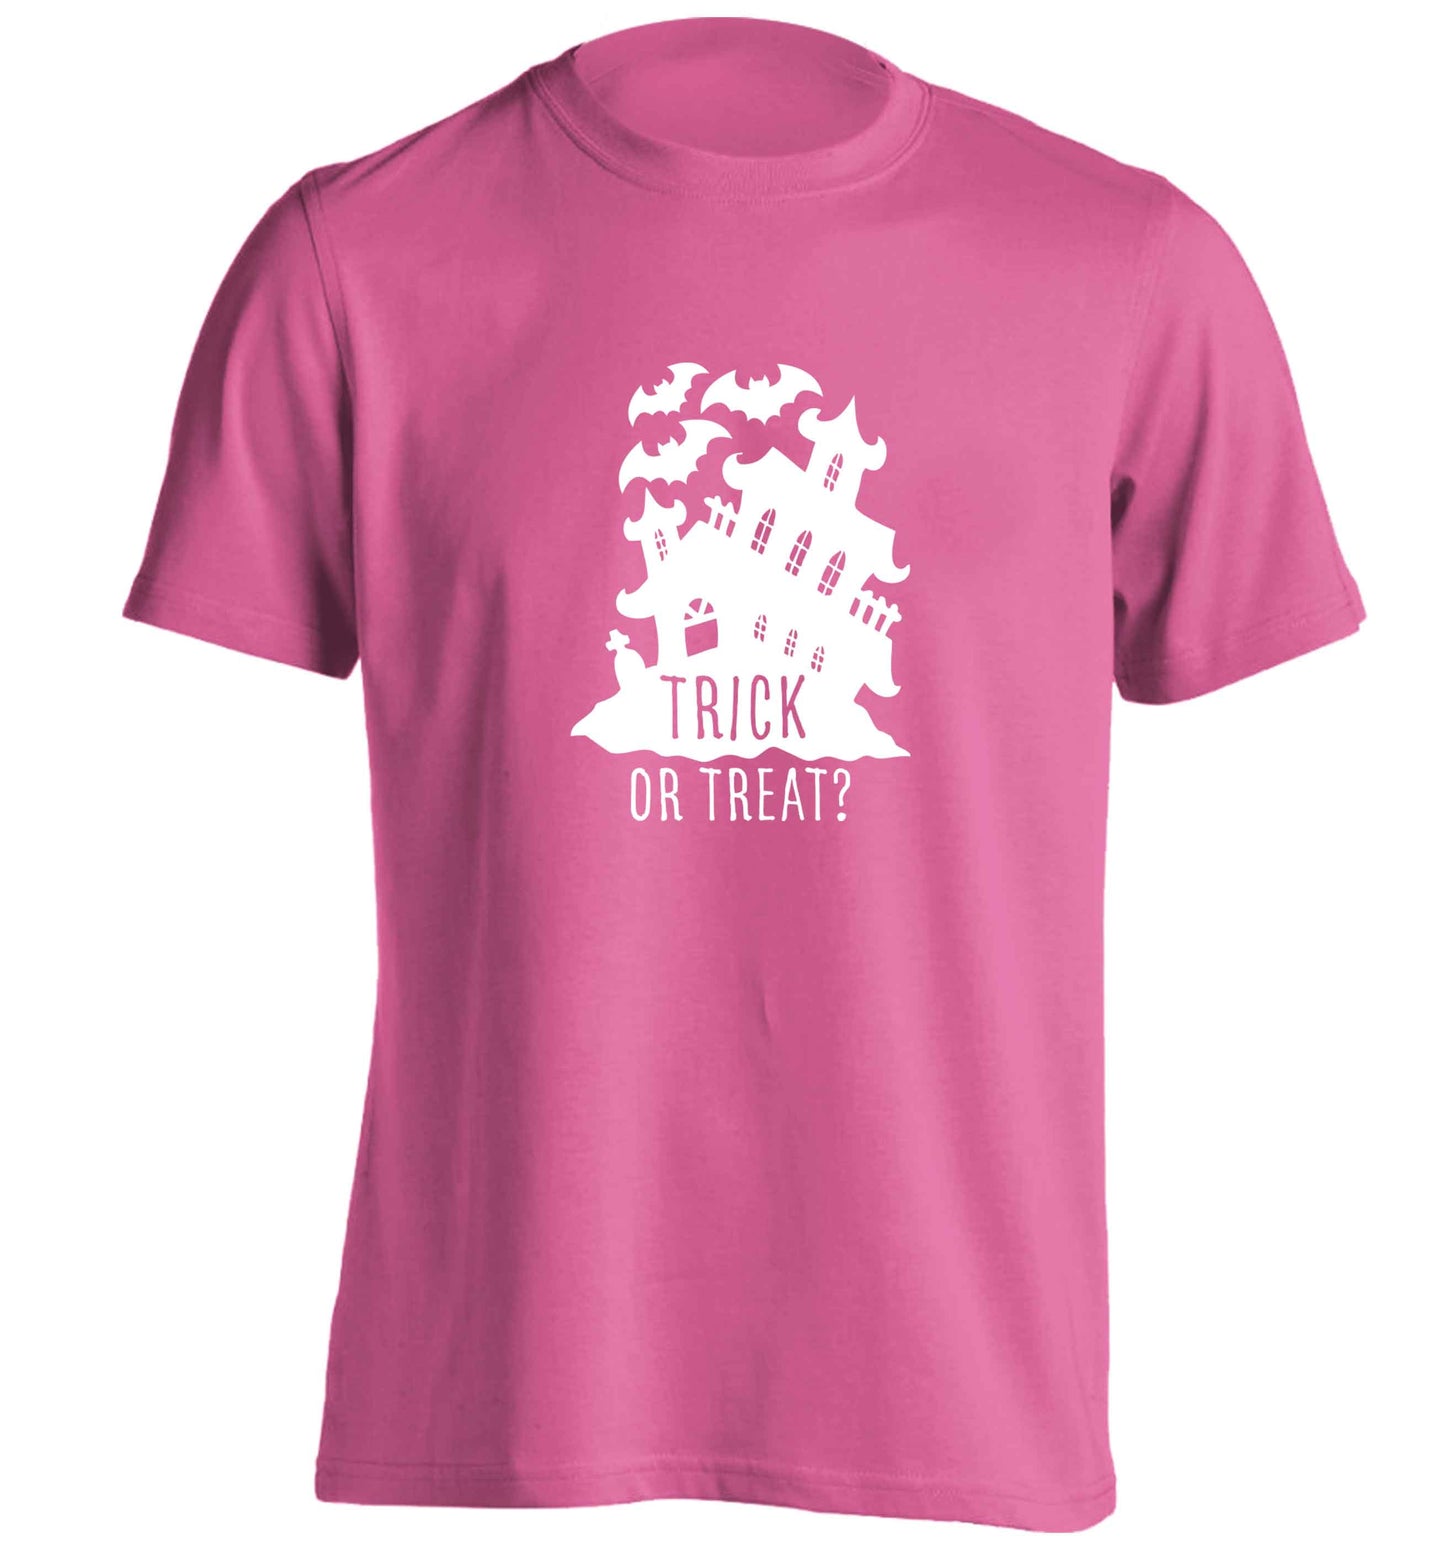 Trick or treat - haunted house adults unisex pink Tshirt 2XL